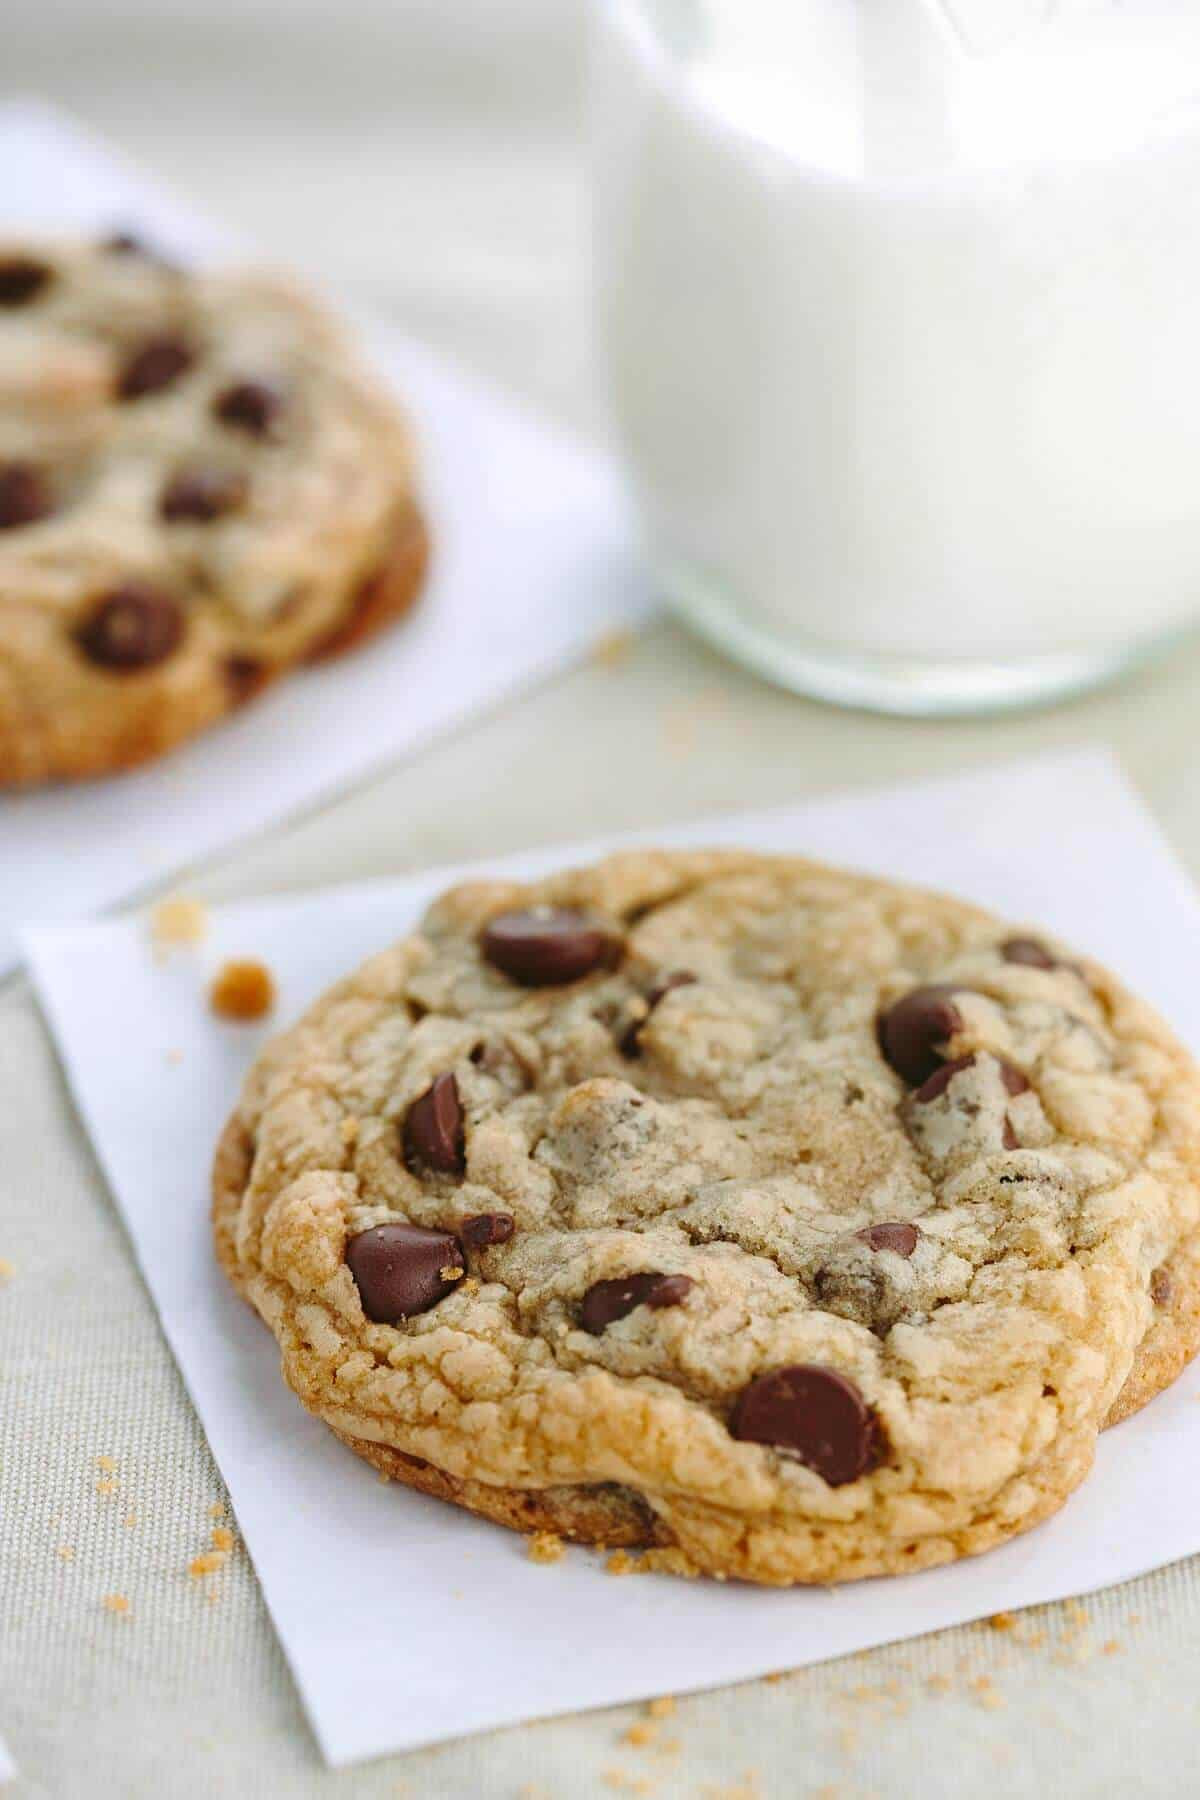 Chewy Chocolate Chip Cookies Recipe
 The Best Chewy Chocolate Chip Cookies Recipe